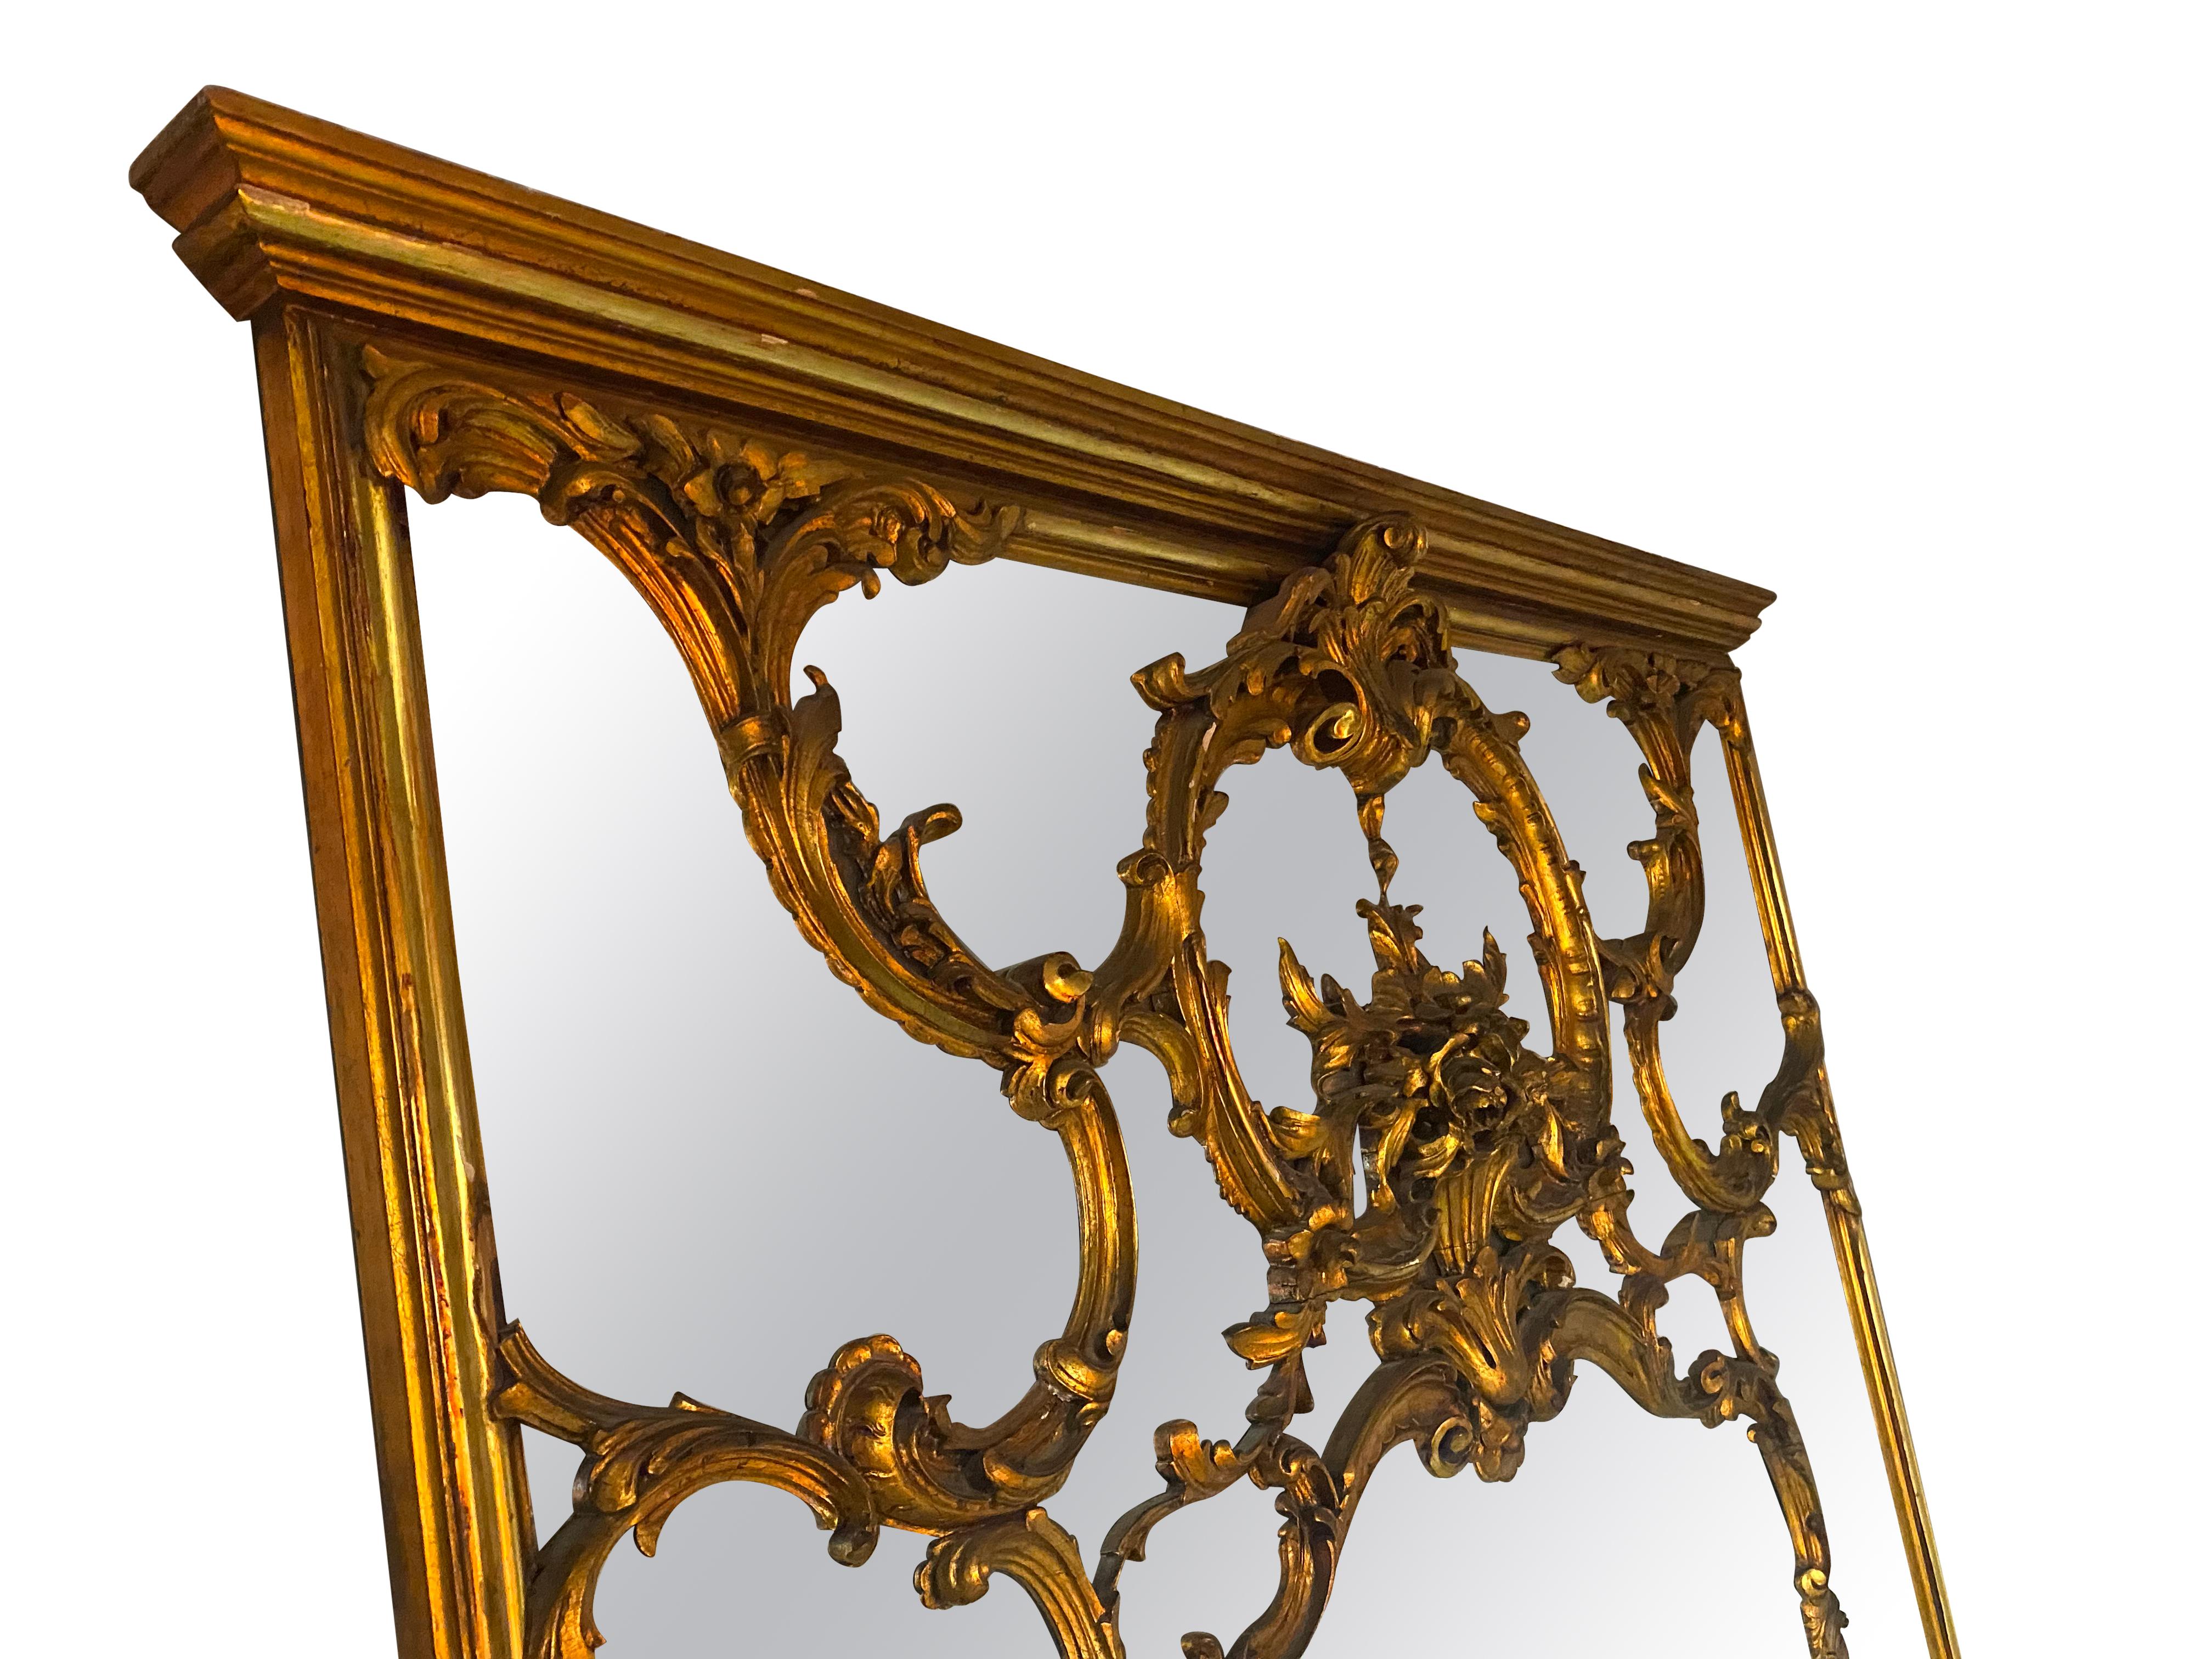 Antique, Decorative, Giltwood, Full Length Mirror  For Sale 4